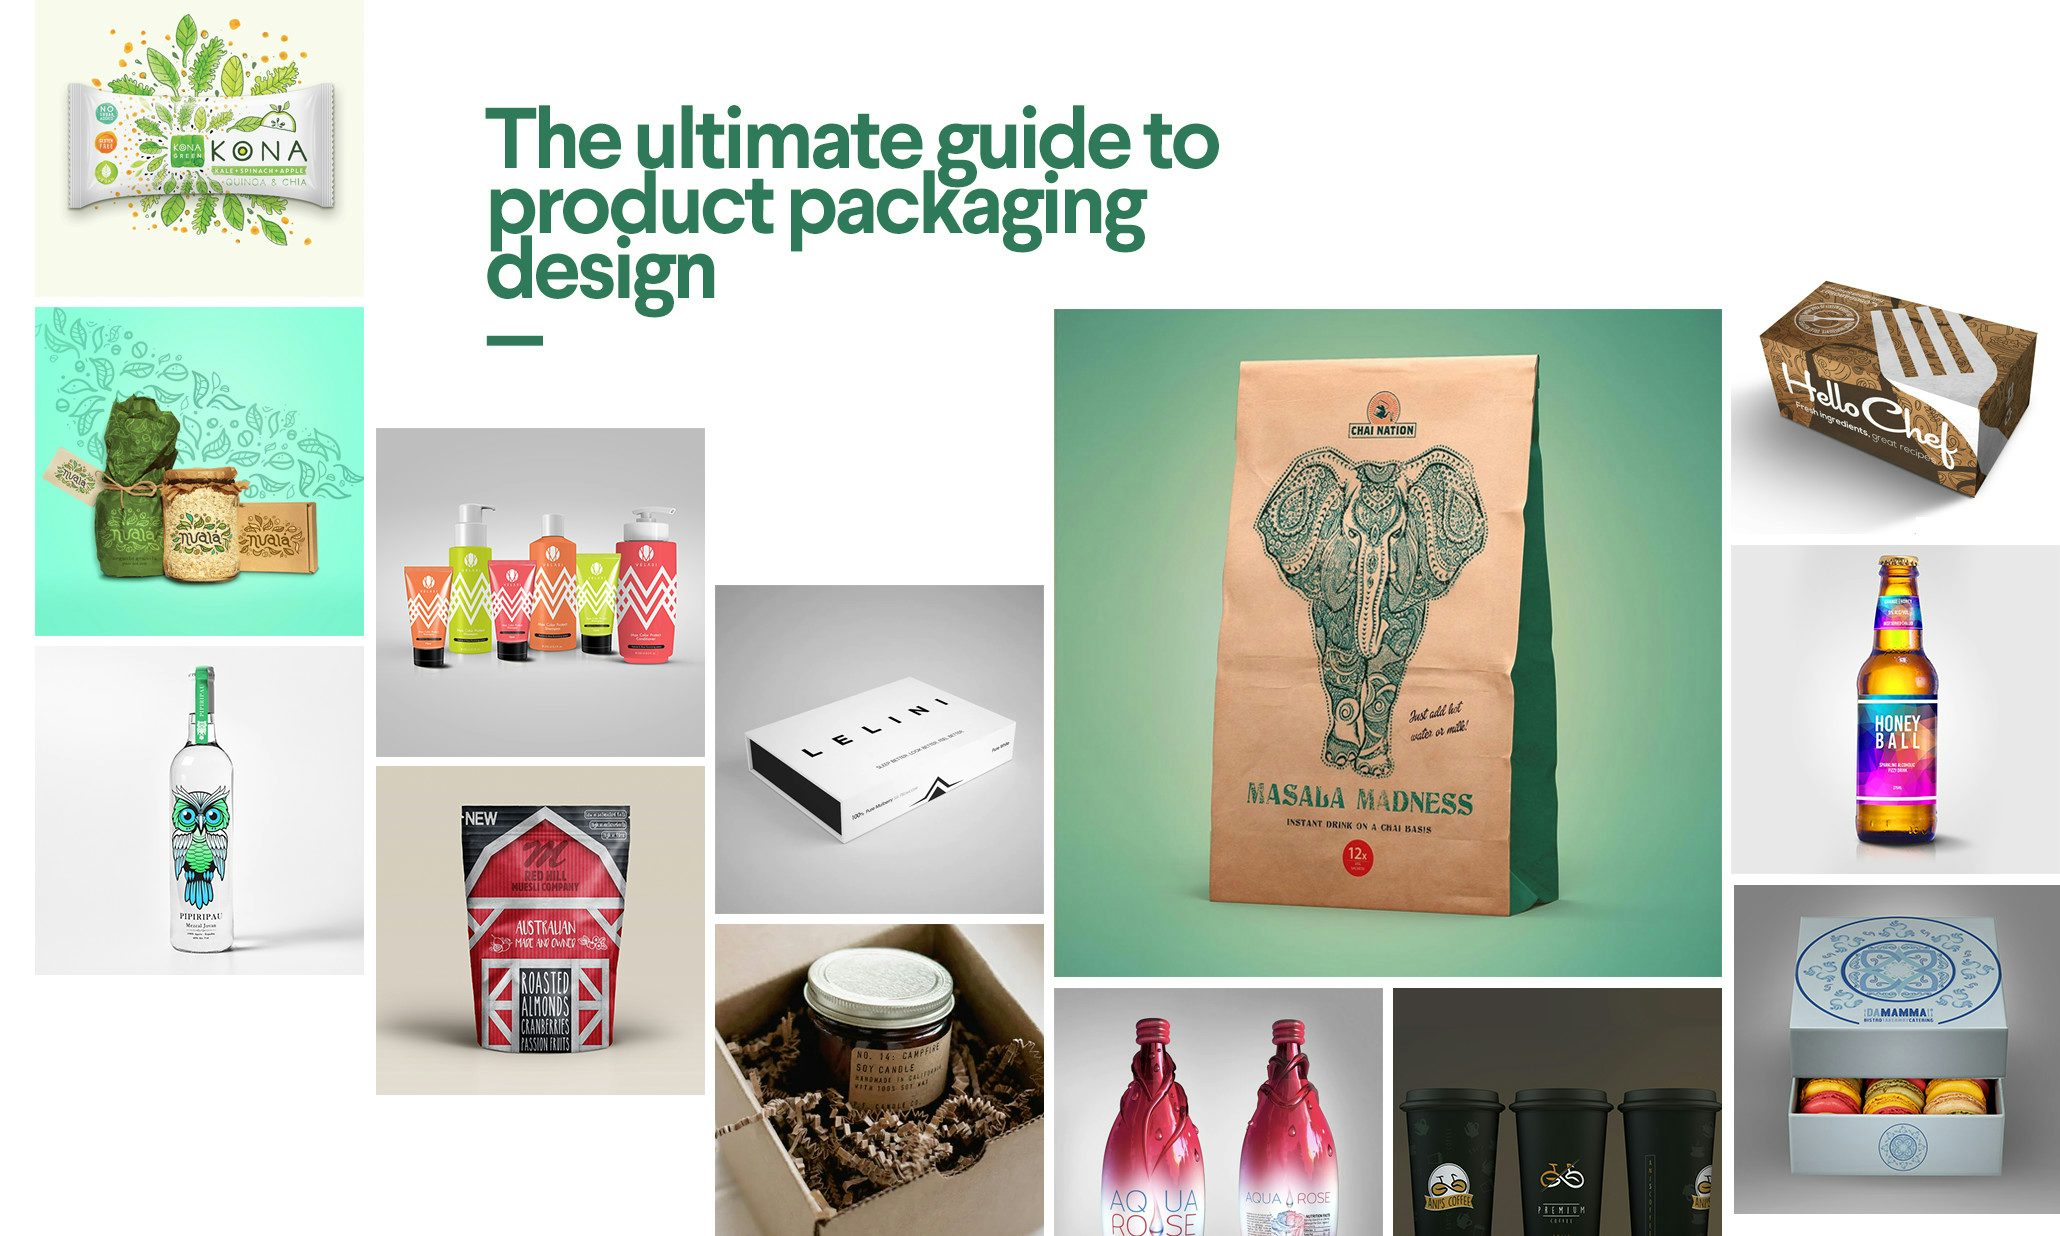 https://99designs-blog.imgix.net/blog/wp-content/uploads/2016/09/ultimate-guide-product-packaging.jpg?auto=format&q=60&w=2060&h=1545&fit=crop&crop=faces